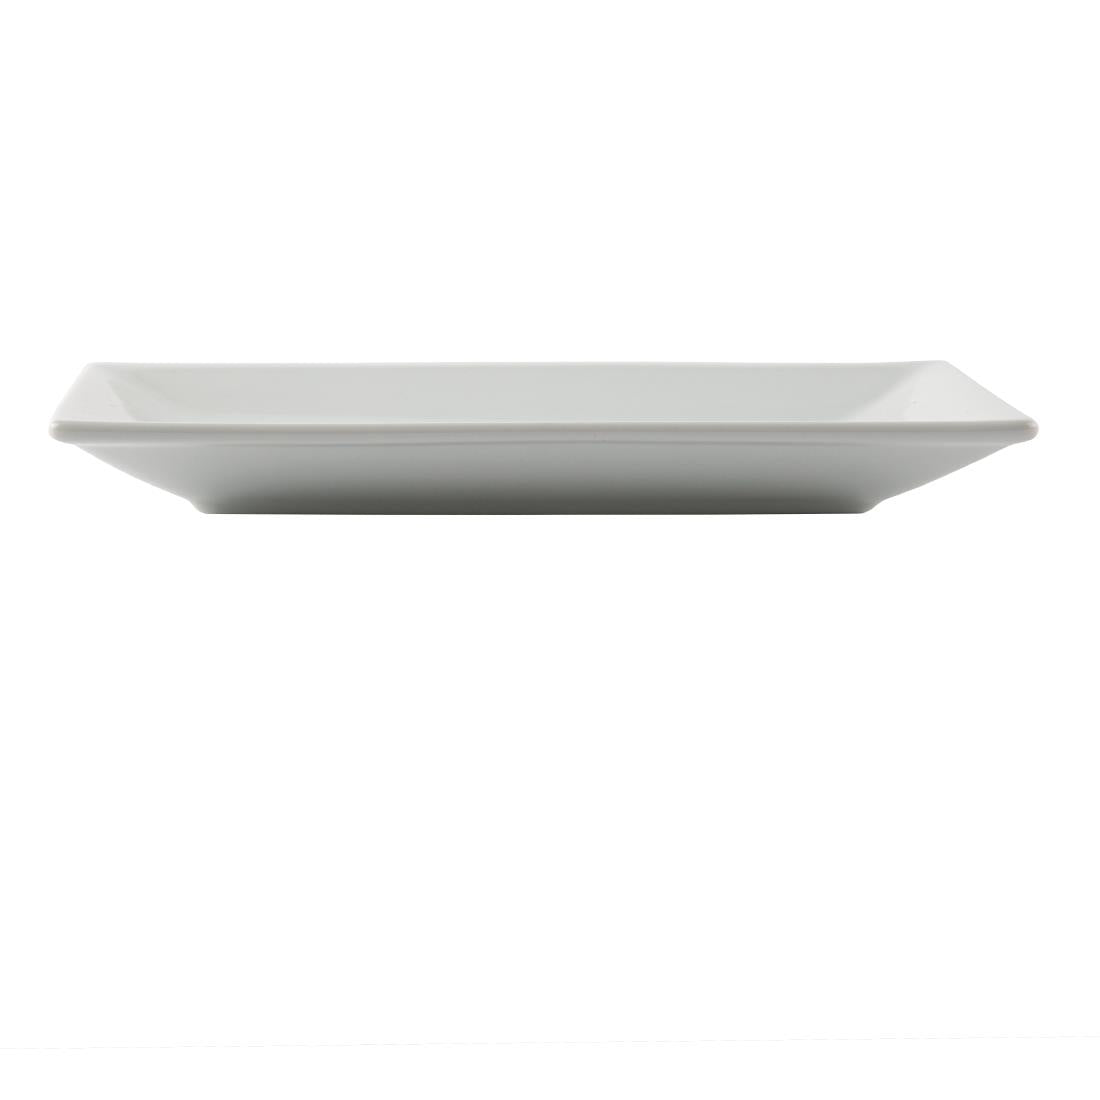 CC894 Olympia Serving Rectangular Platters 250x 150mm (Pack of 4)